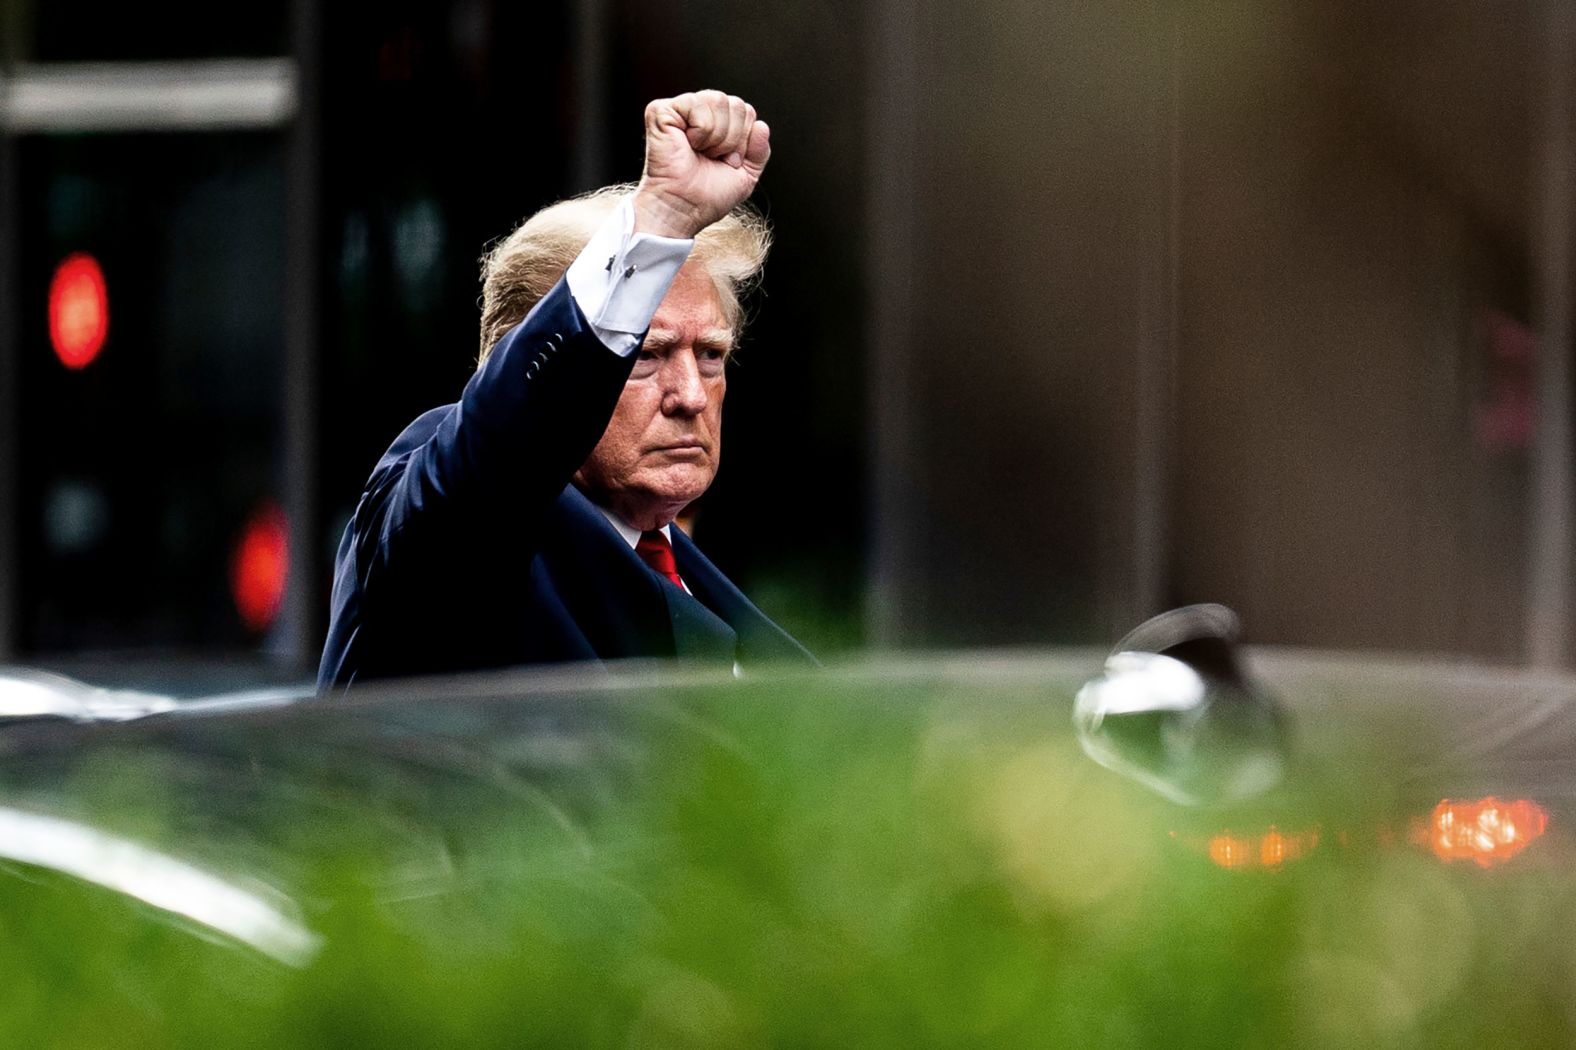 Trump gestures as he departs Trump Tower in New York in August 2022. He was on his way to the New York attorney general's office, where <a href="index.php?page=&url=https%3A%2F%2Fwww.cnn.com%2F2022%2F08%2F10%2Fpolitics%2Ftrump-deposition-ny-attorney-general%2Findex.html" target="_blank">he invoked the Fifth Amendment</a> at a scheduled deposition. Trump was to be deposed as part of a more than three-year civil investigation into whether the Trump Organization misled lenders, insurers and tax authorities by providing them misleading financial statements. Trump and the Trump Organization have previously denied any wrongdoing.